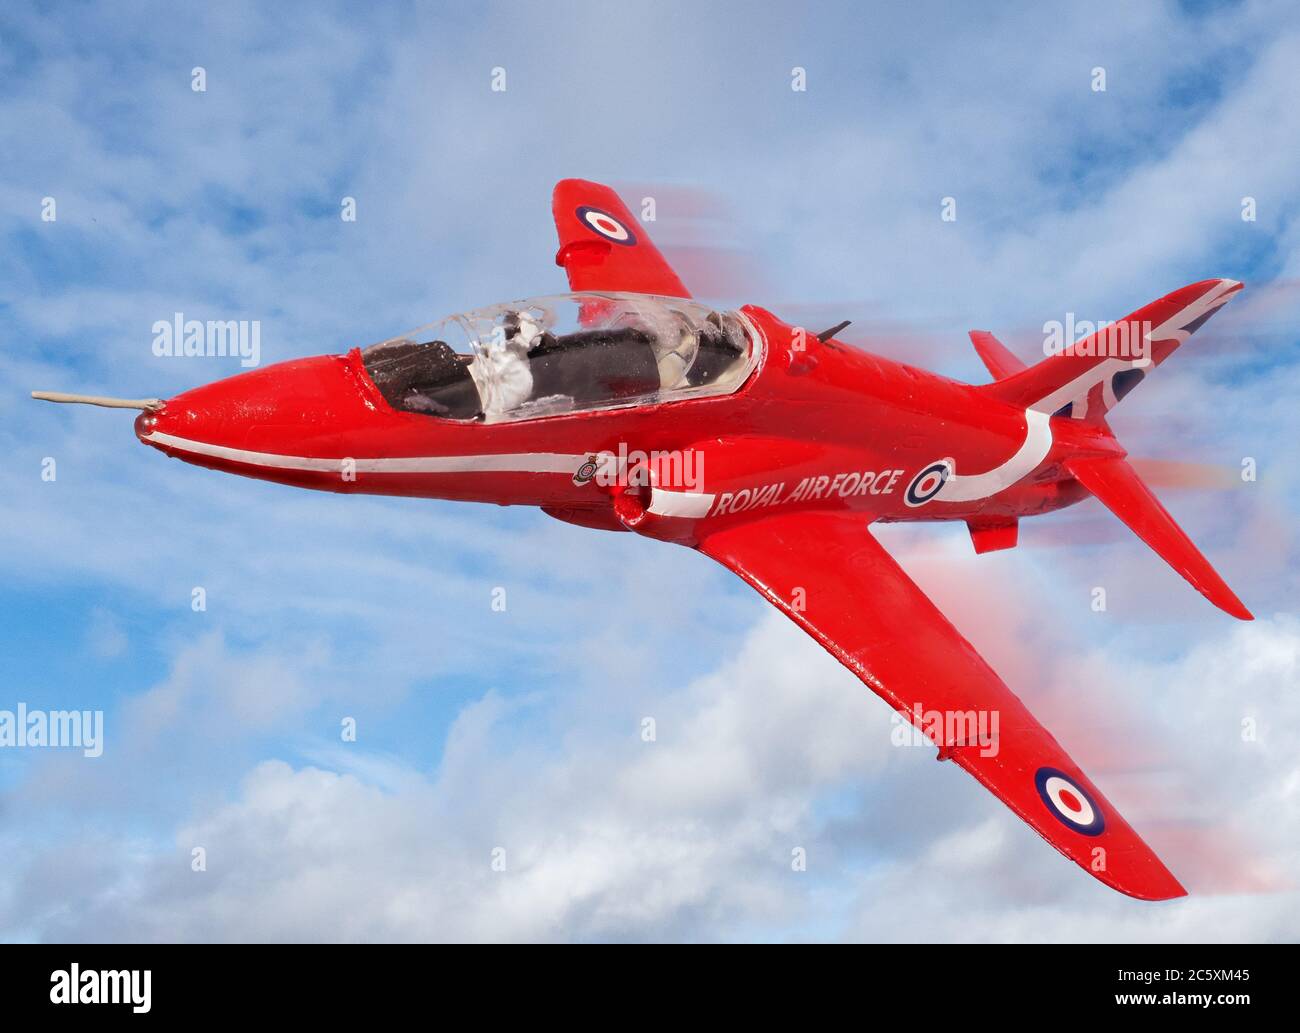 Model Red Arrows Hawk from Airfix kit flies through the sky Stock Photo